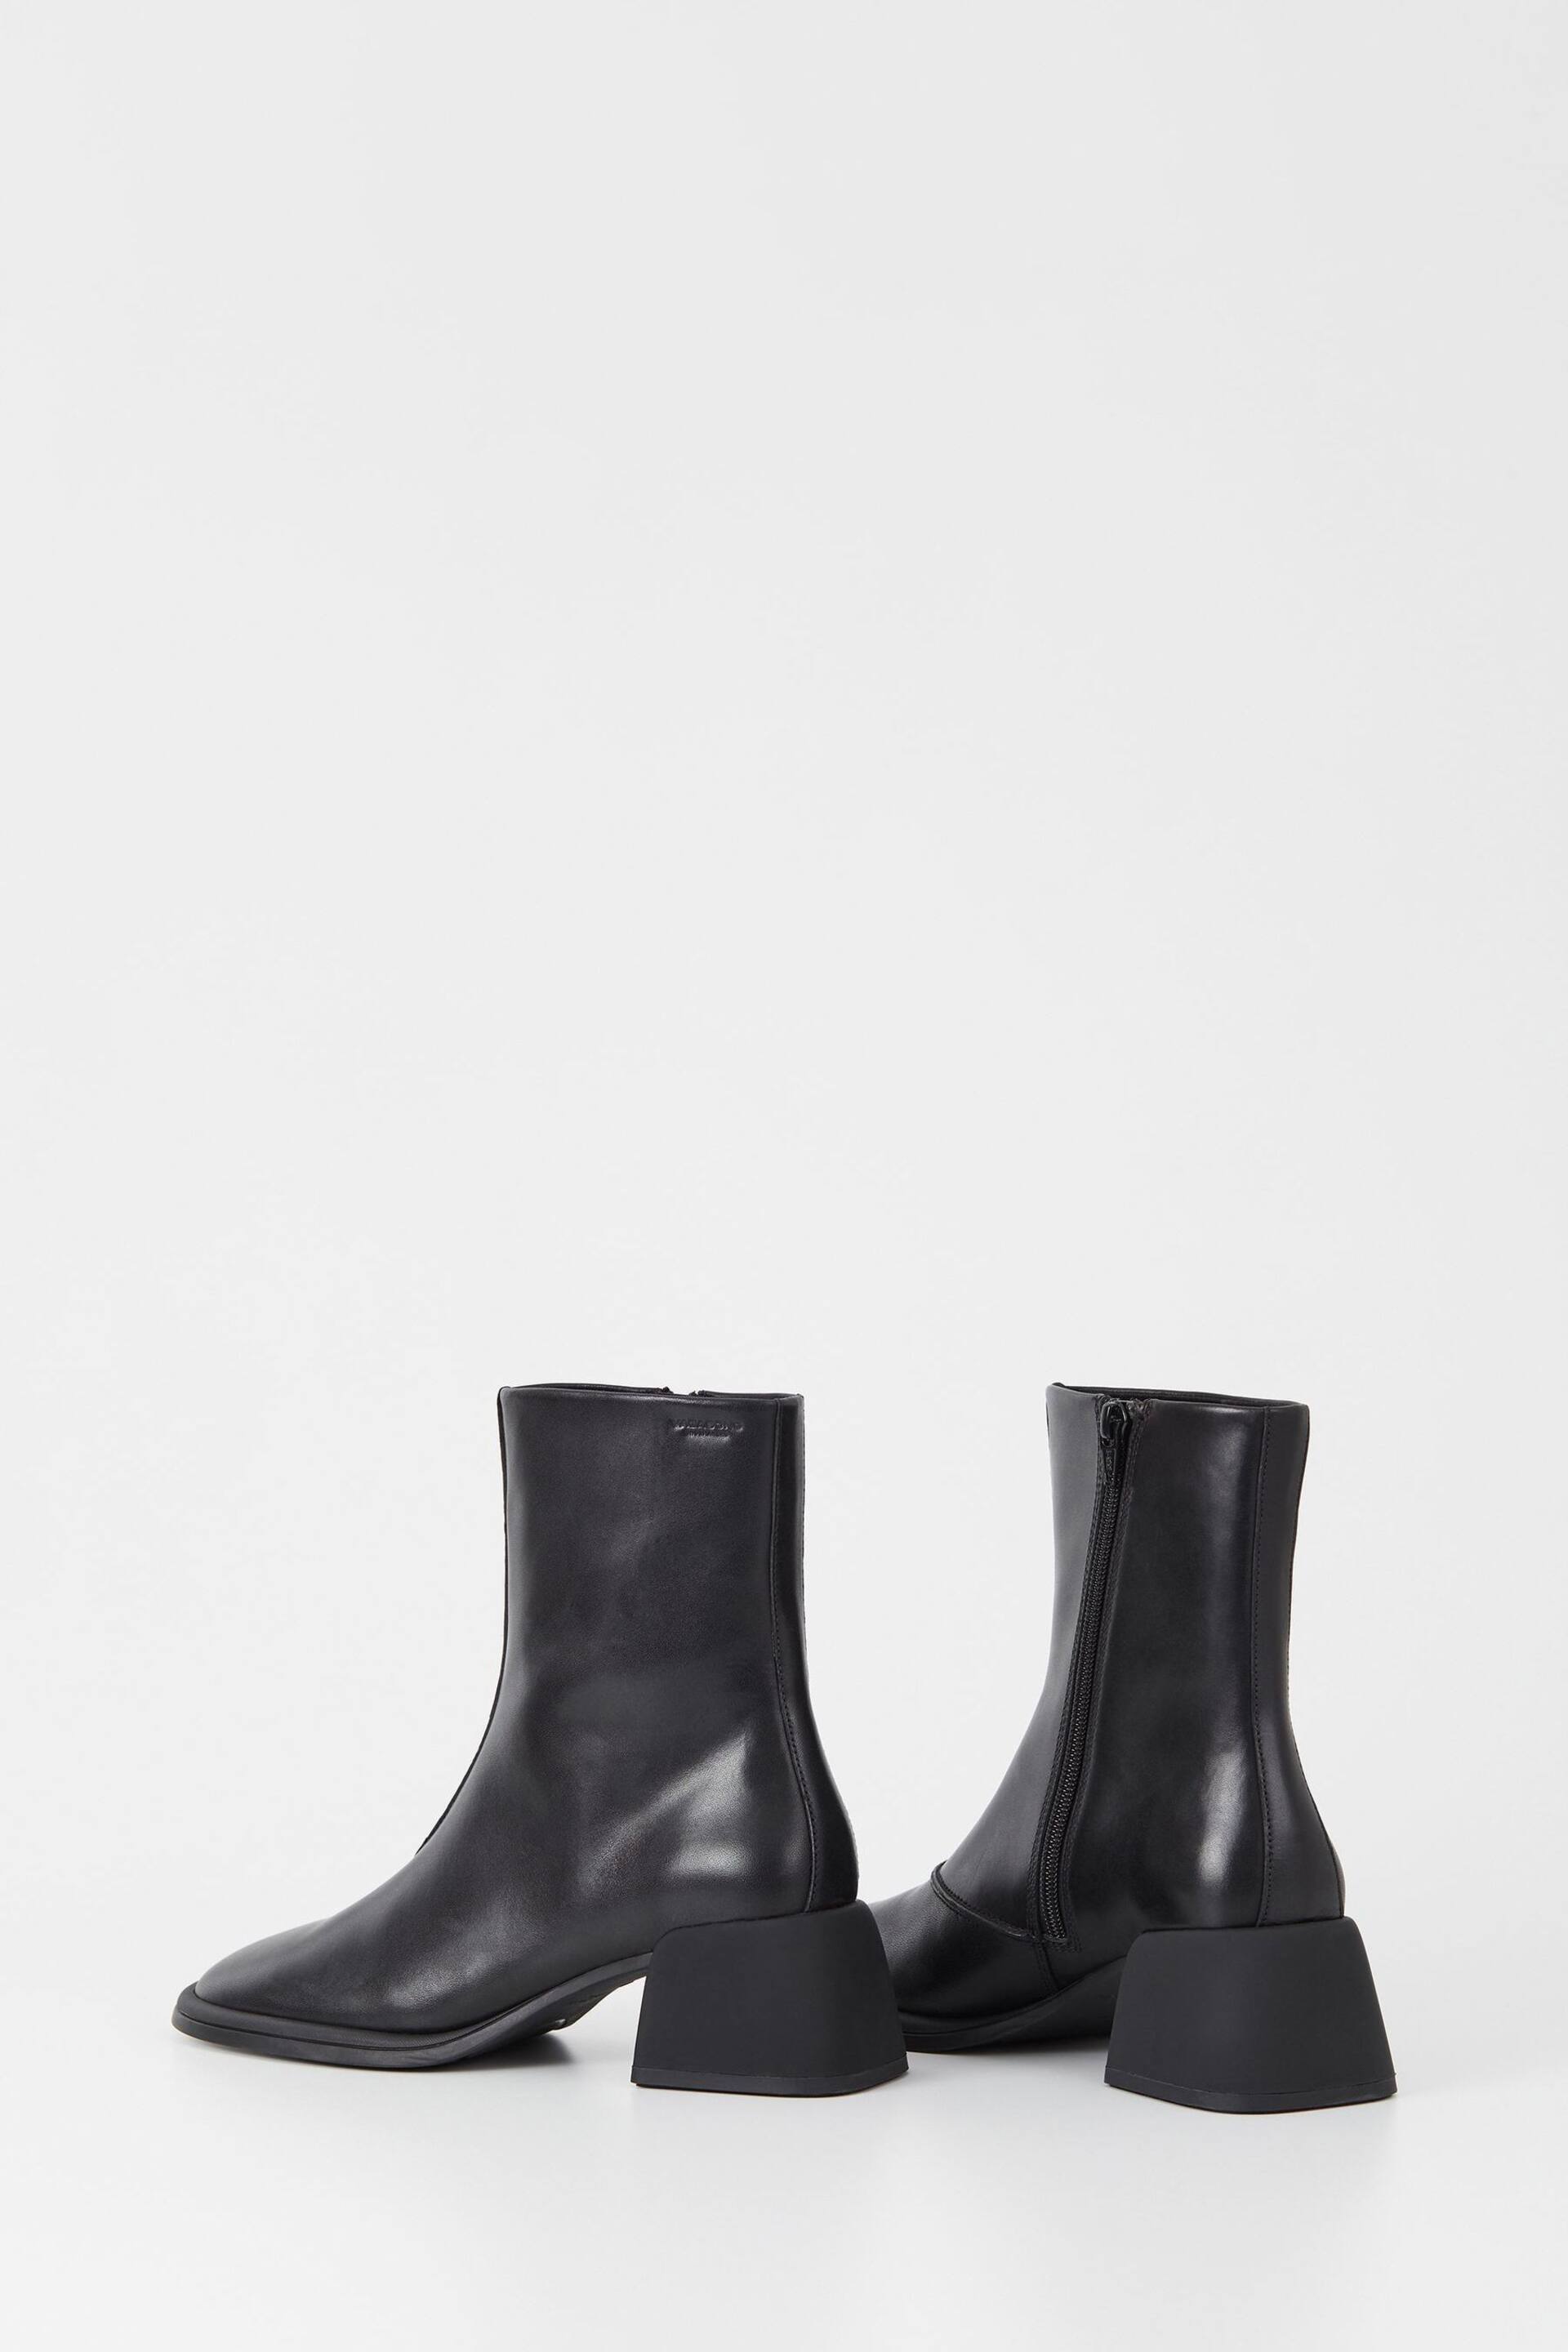 Vagabond Shoemakers Ansie Ankle Black Boots - Image 3 of 3